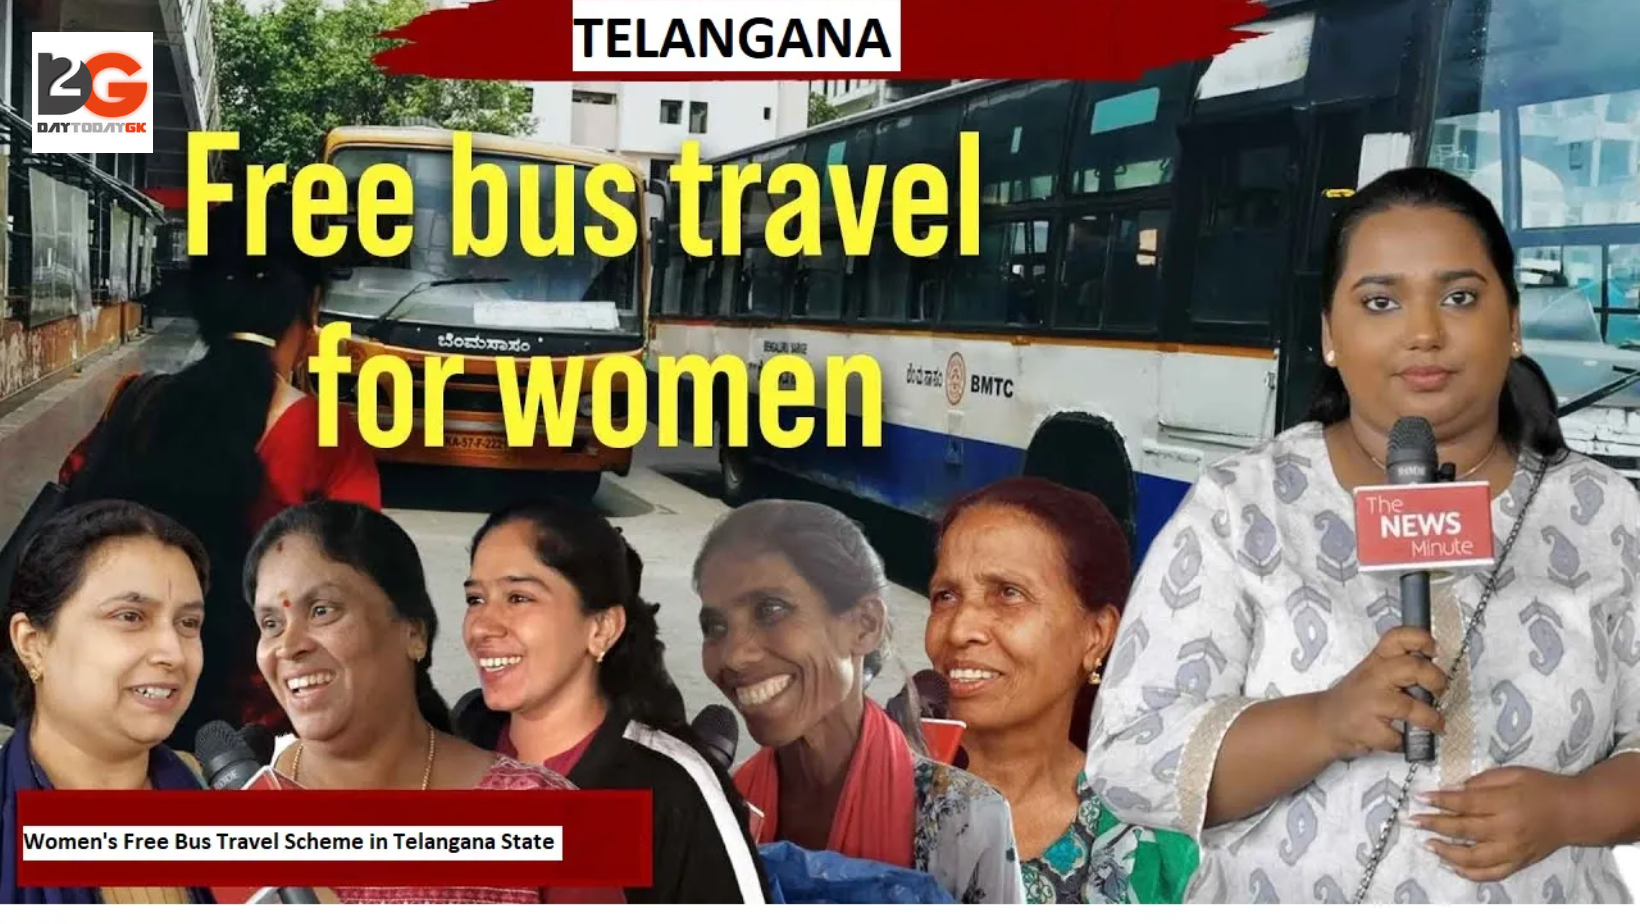 Telangana Offers Free Bus Transportation for Women and Transgender People